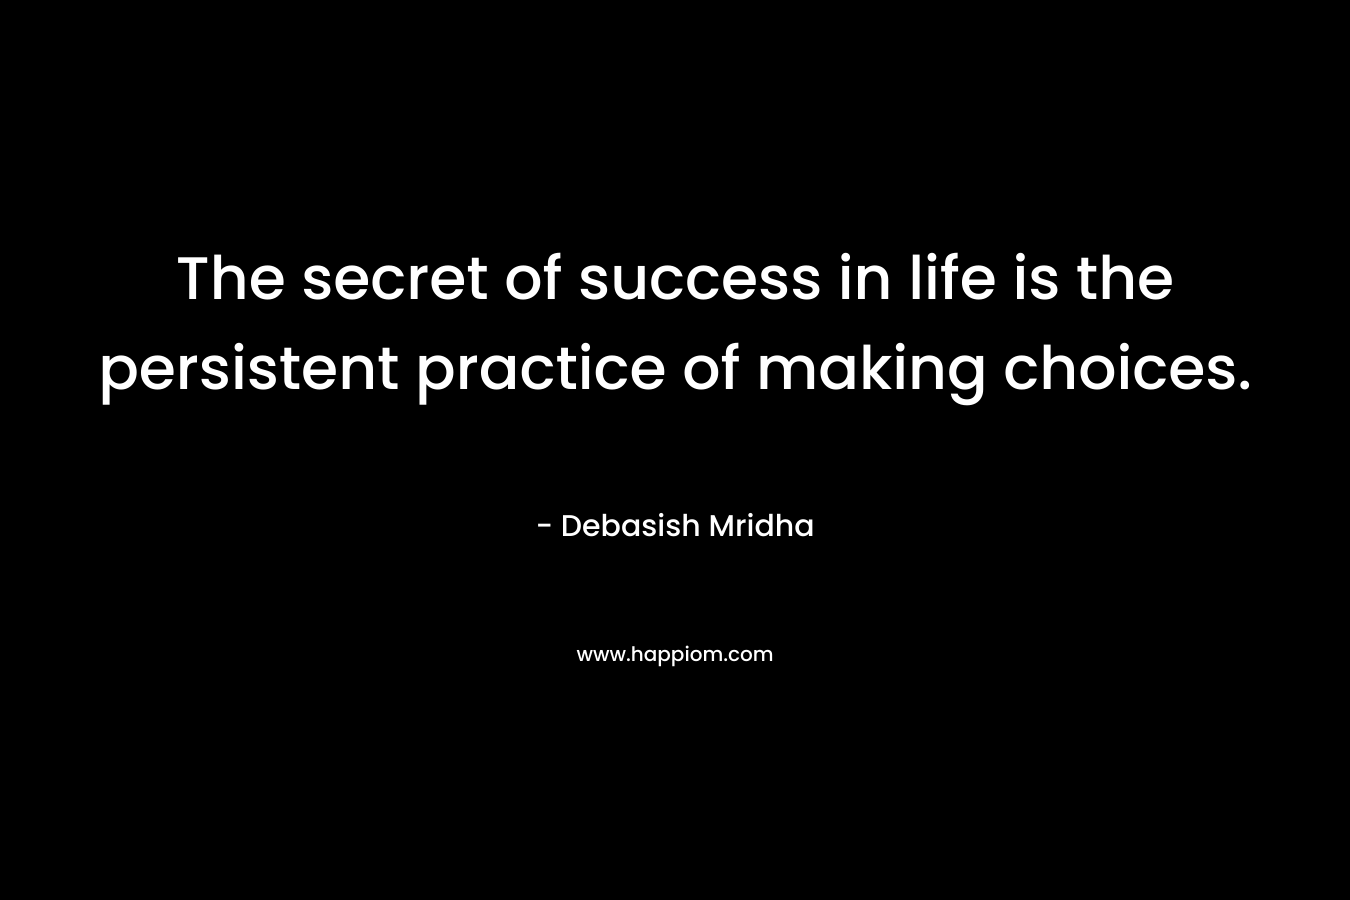 The secret of success in life is the persistent practice of making choices. – Debasish Mridha